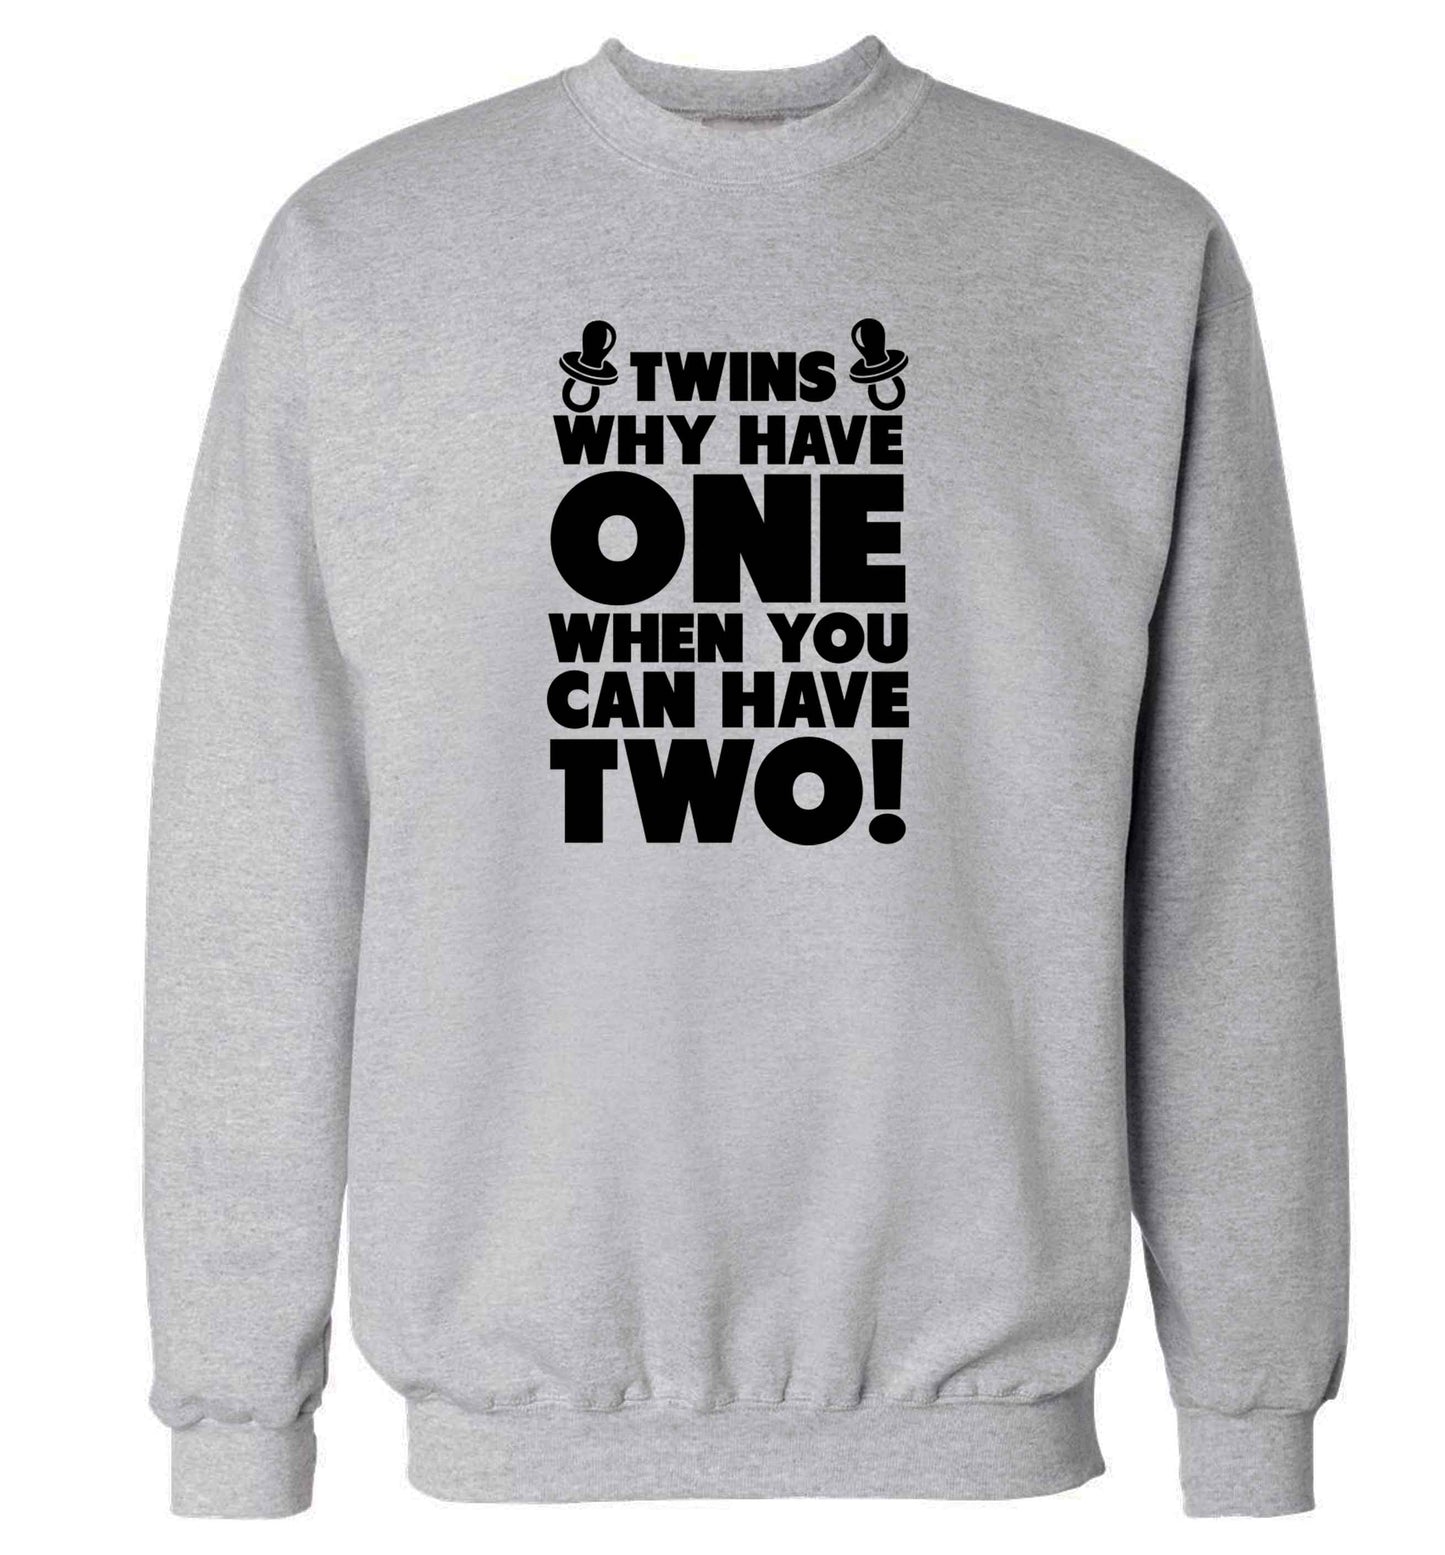 Twins why have one when you can have two adult's unisex grey sweater 2XL